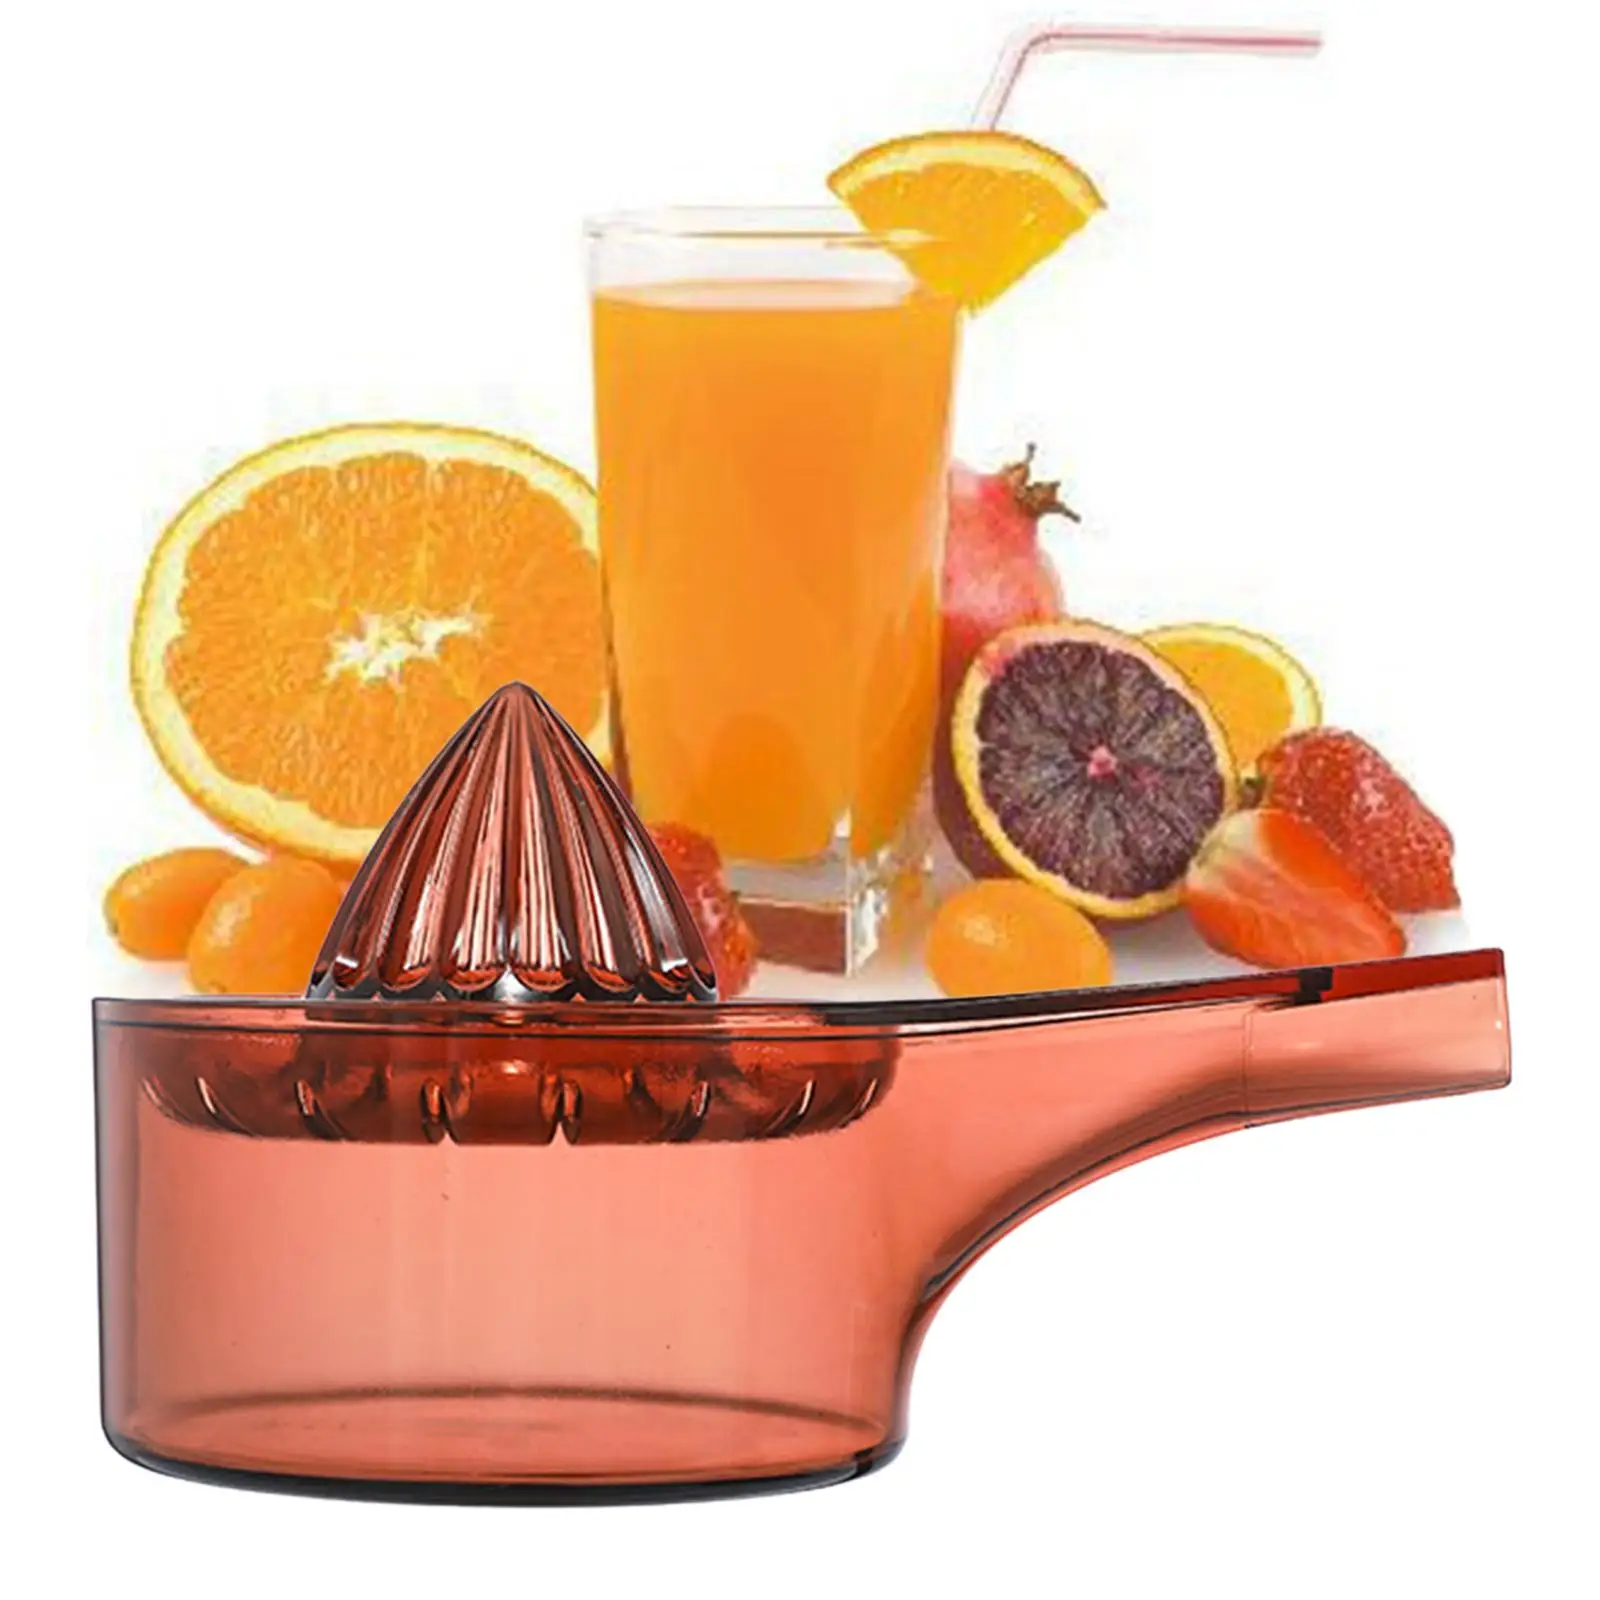 Manual Hand Lemon Orange Lime Juicer Spout Design for Pouring Juice 8.3Inchx4.7inch Also Ladle Use Transparent Body Easy Use